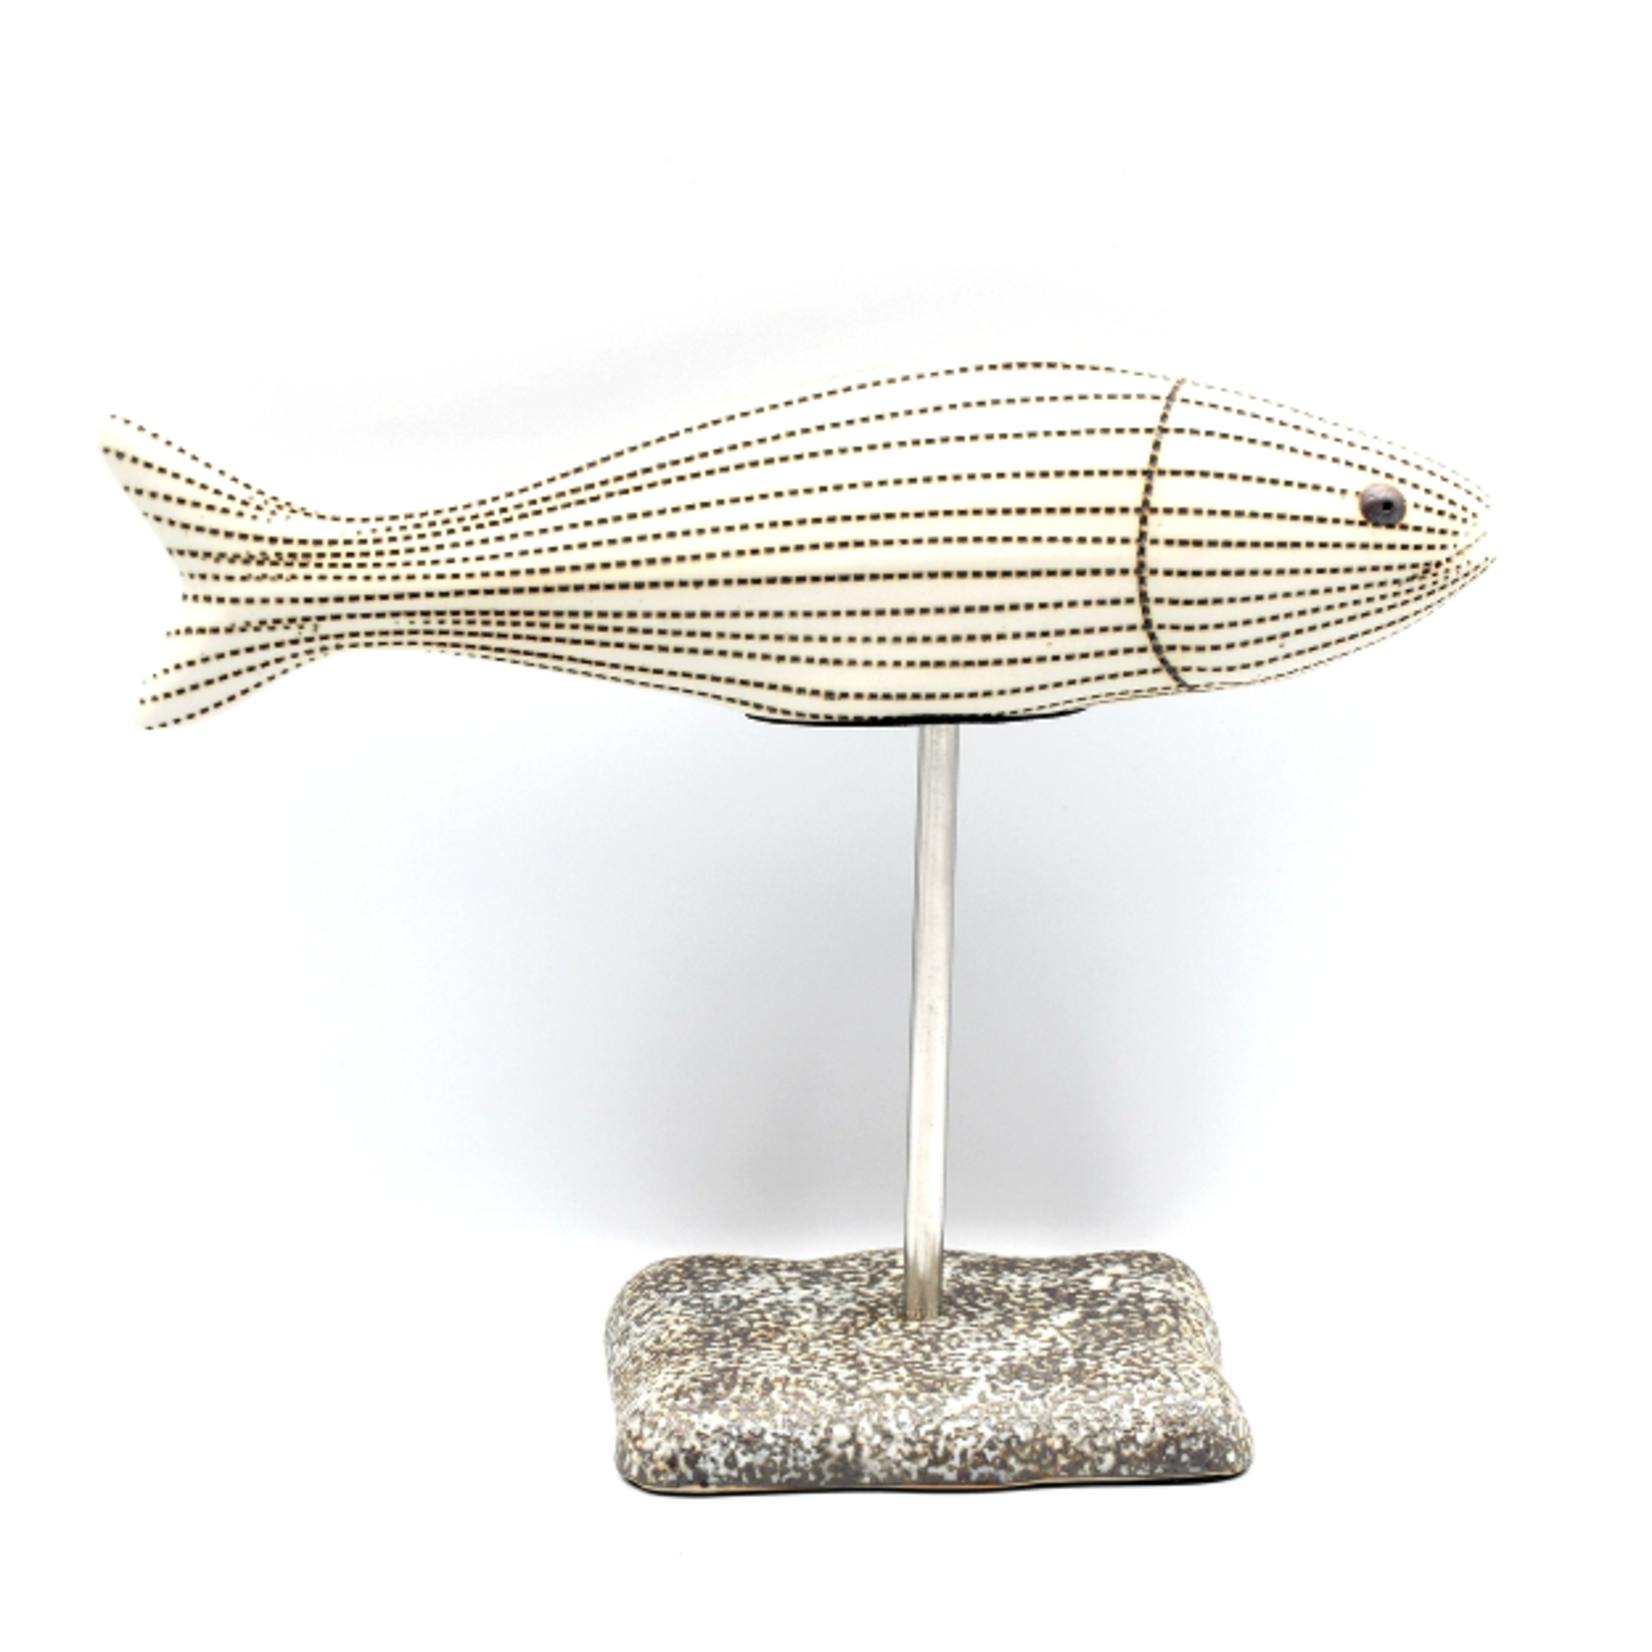 Outside The Box 7" Adrians Fish White & Brown Dots Handcrafted Porcelain Ceramic Sculpture